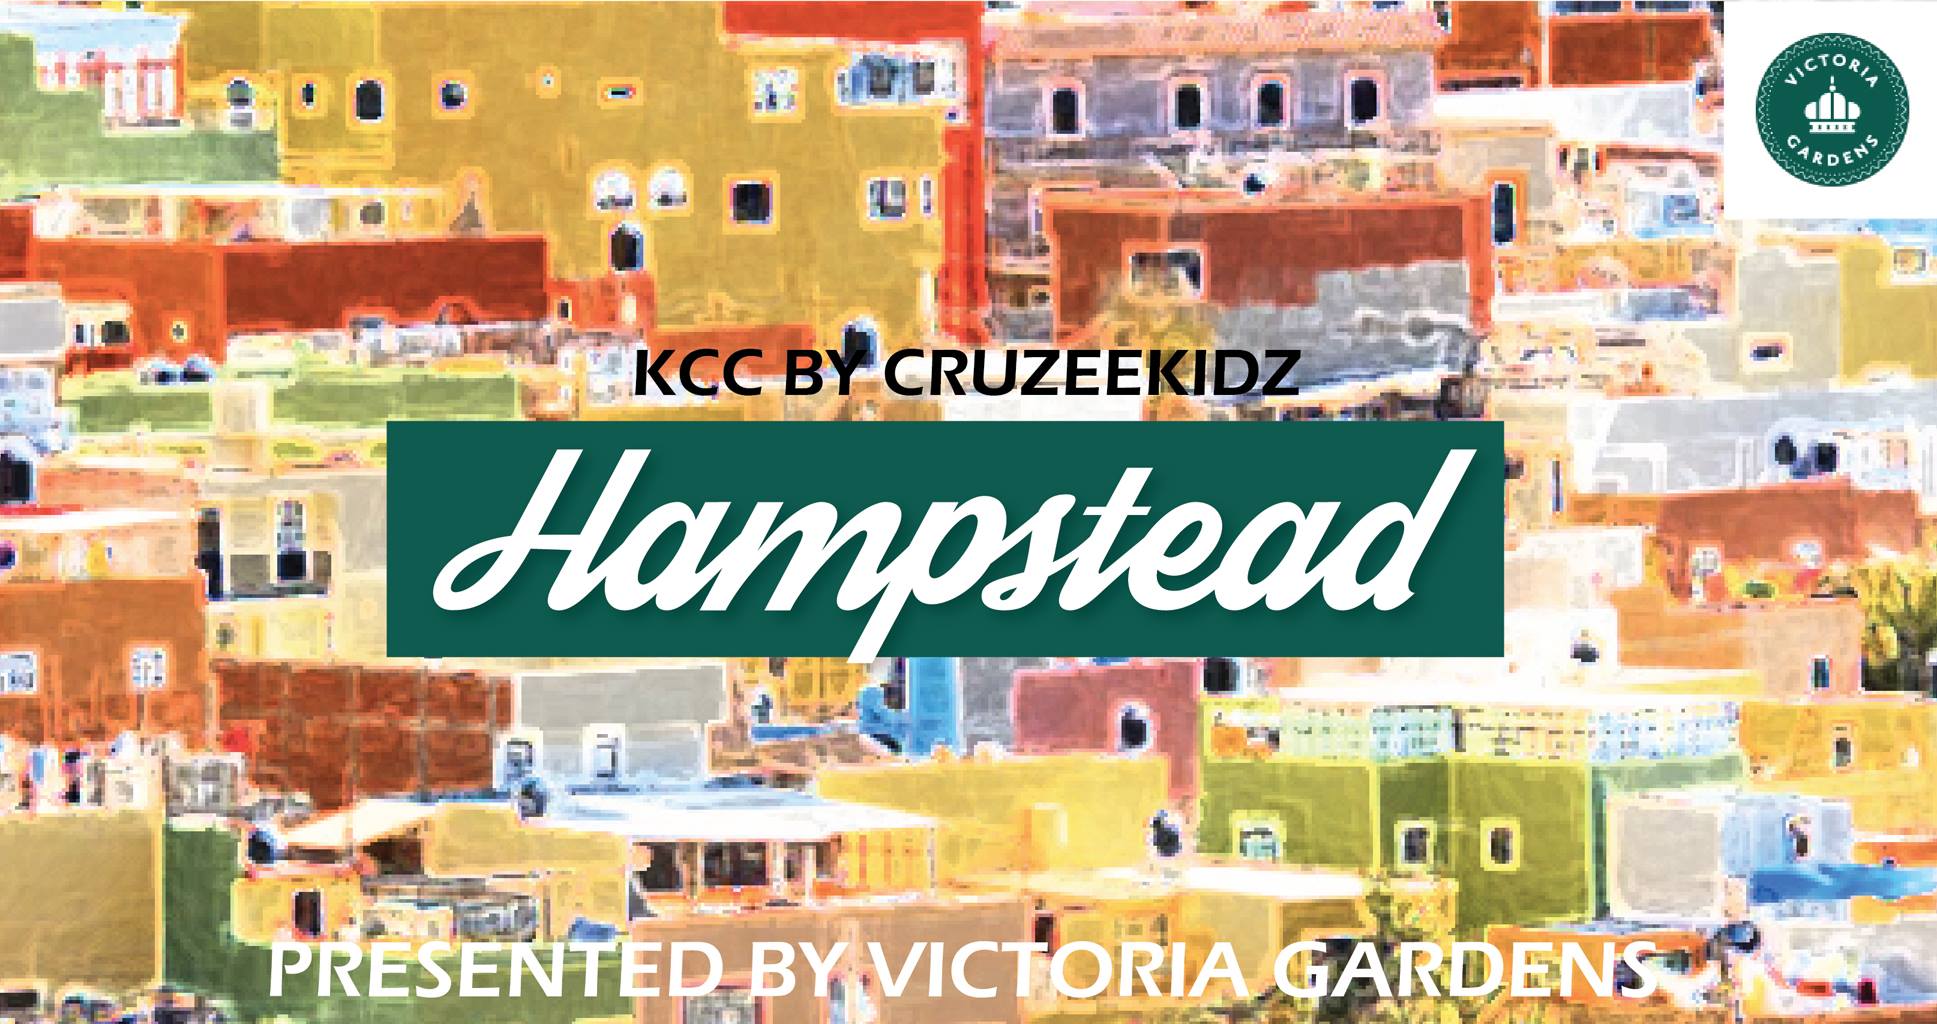 Kcc Hampstead presented by Victoria Gardens